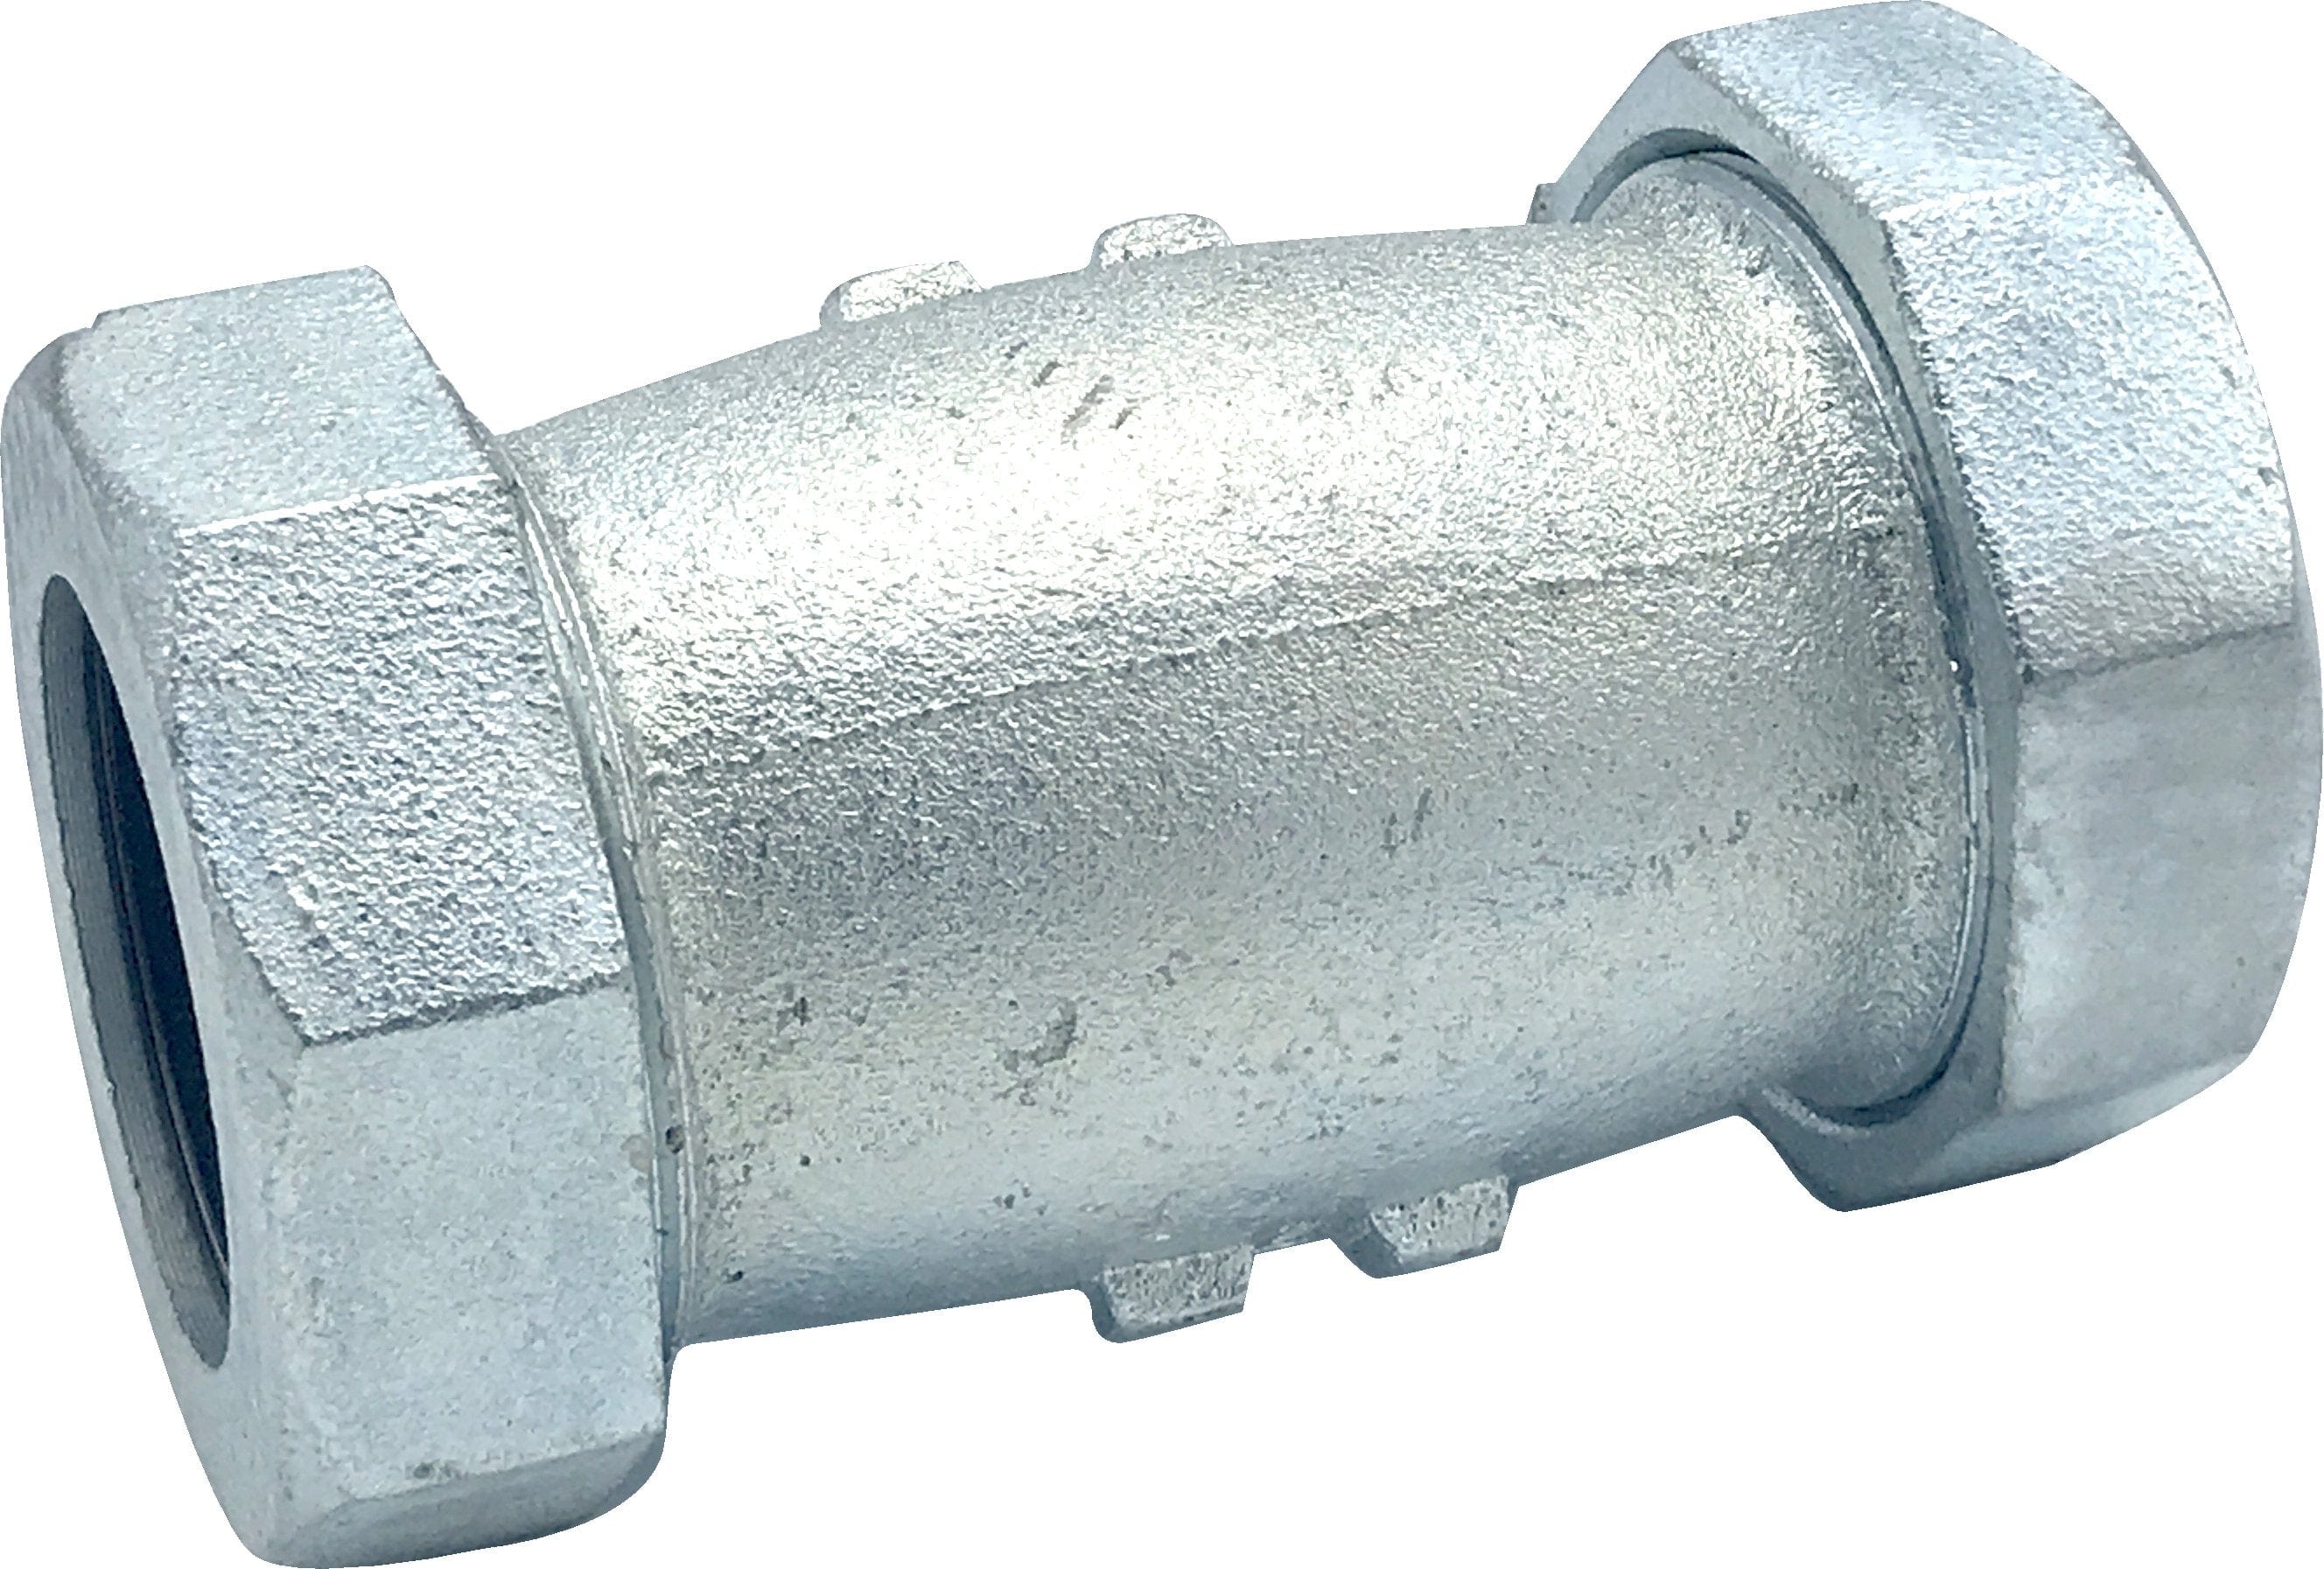 3/4" Long Galvanized Compression Coupling